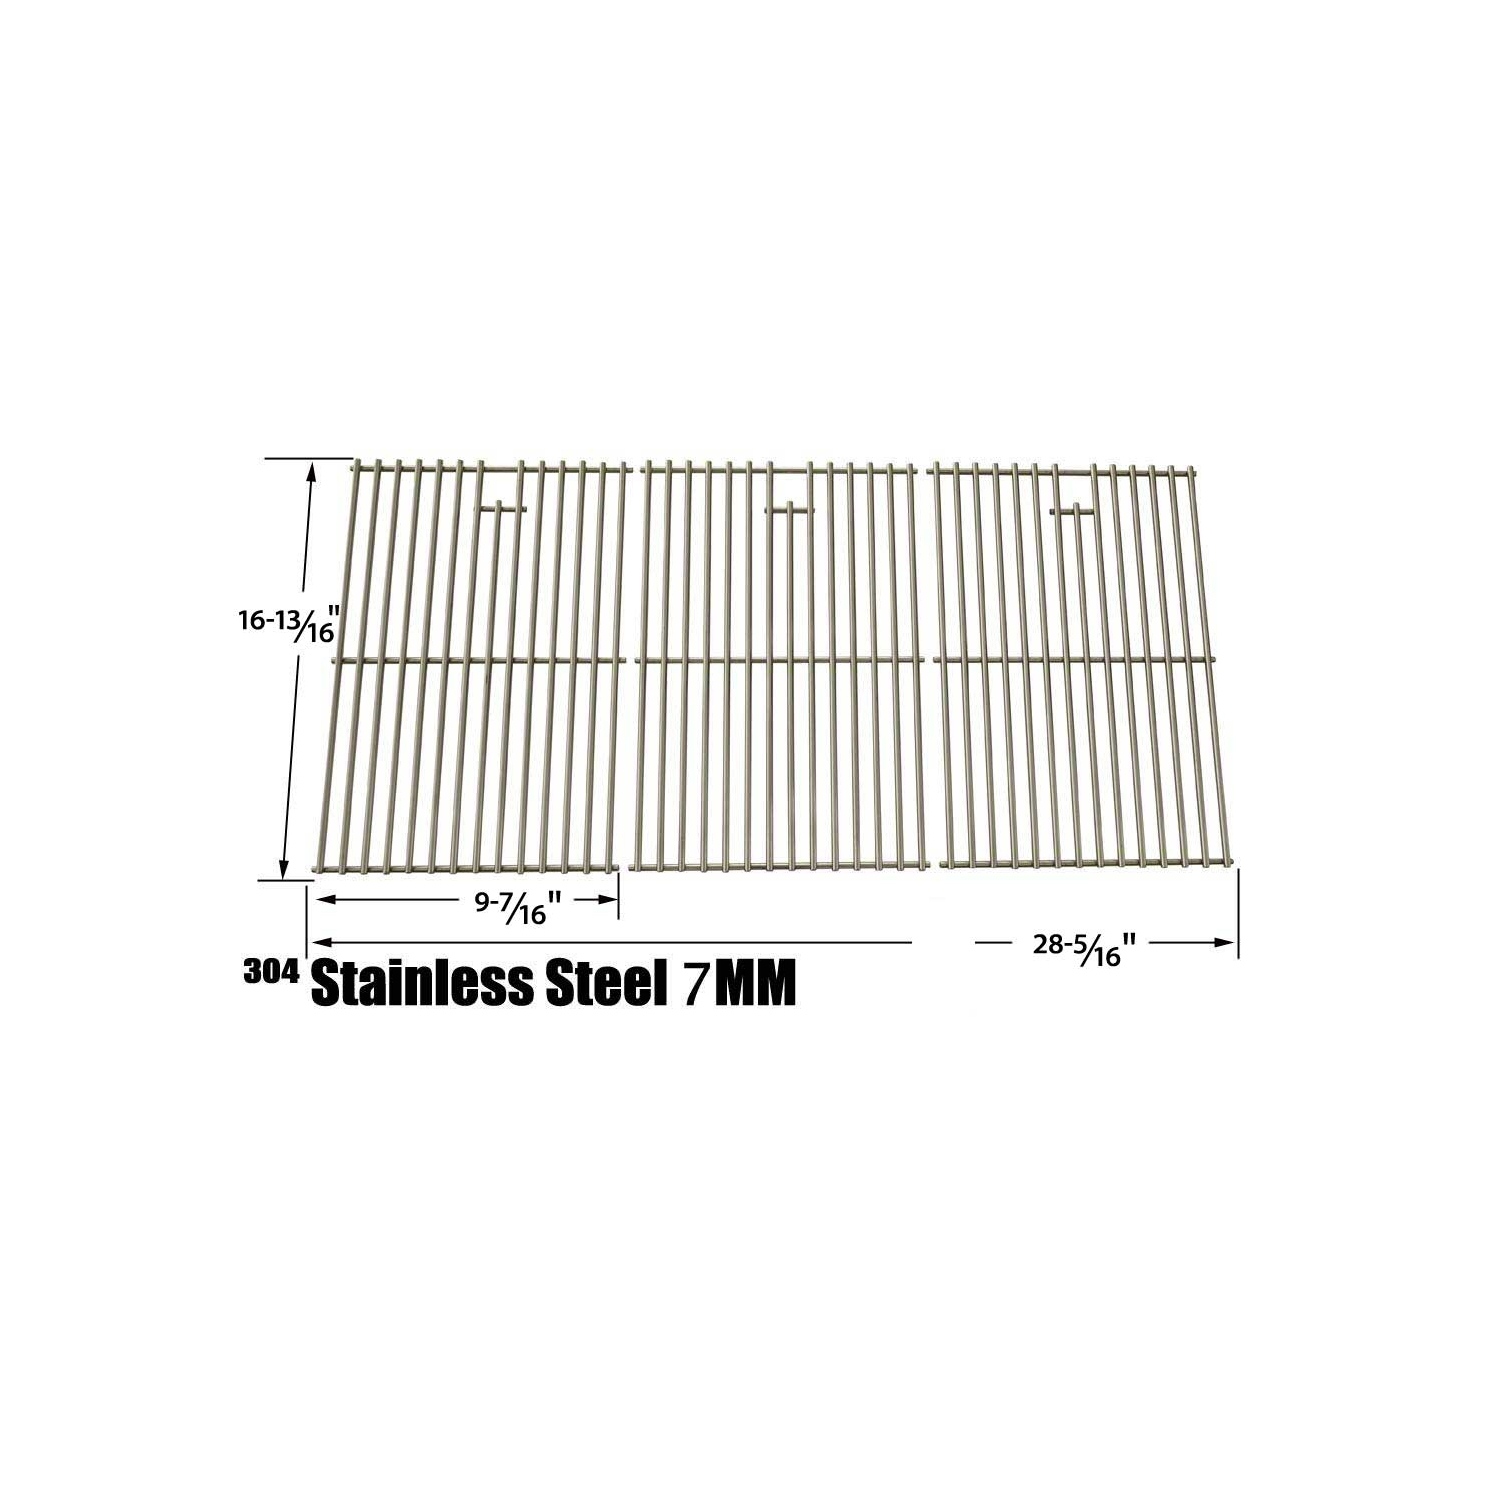 Cooking Grid For BHG H13-101-099-01, GBC1362W Backyard Classic BY12-084-029-98 and Uniflame GBC1059WB Models